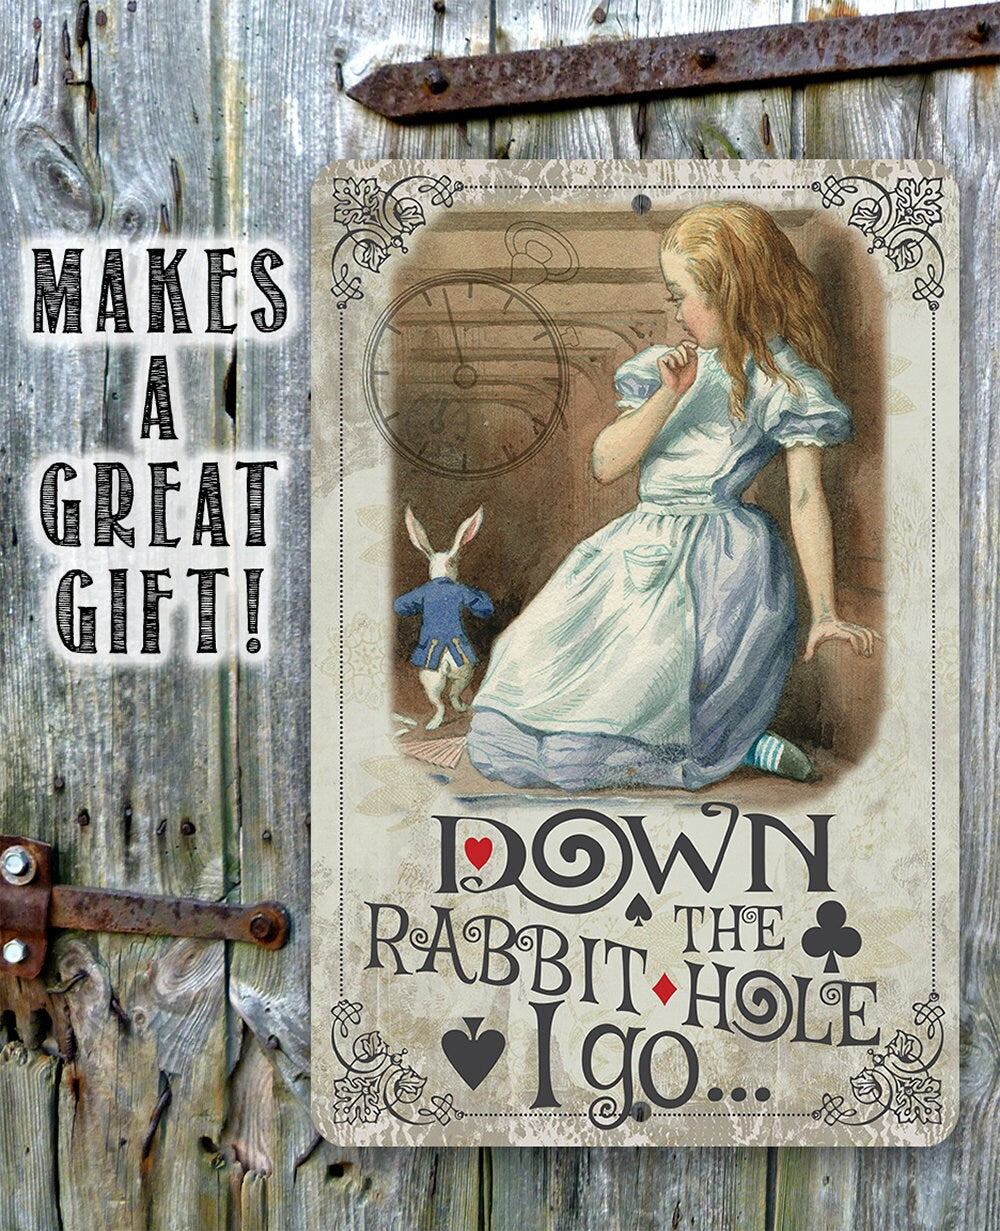 Down The Rabbit Hole I Go - Metal Sign Metal Sign Lone Star Art 